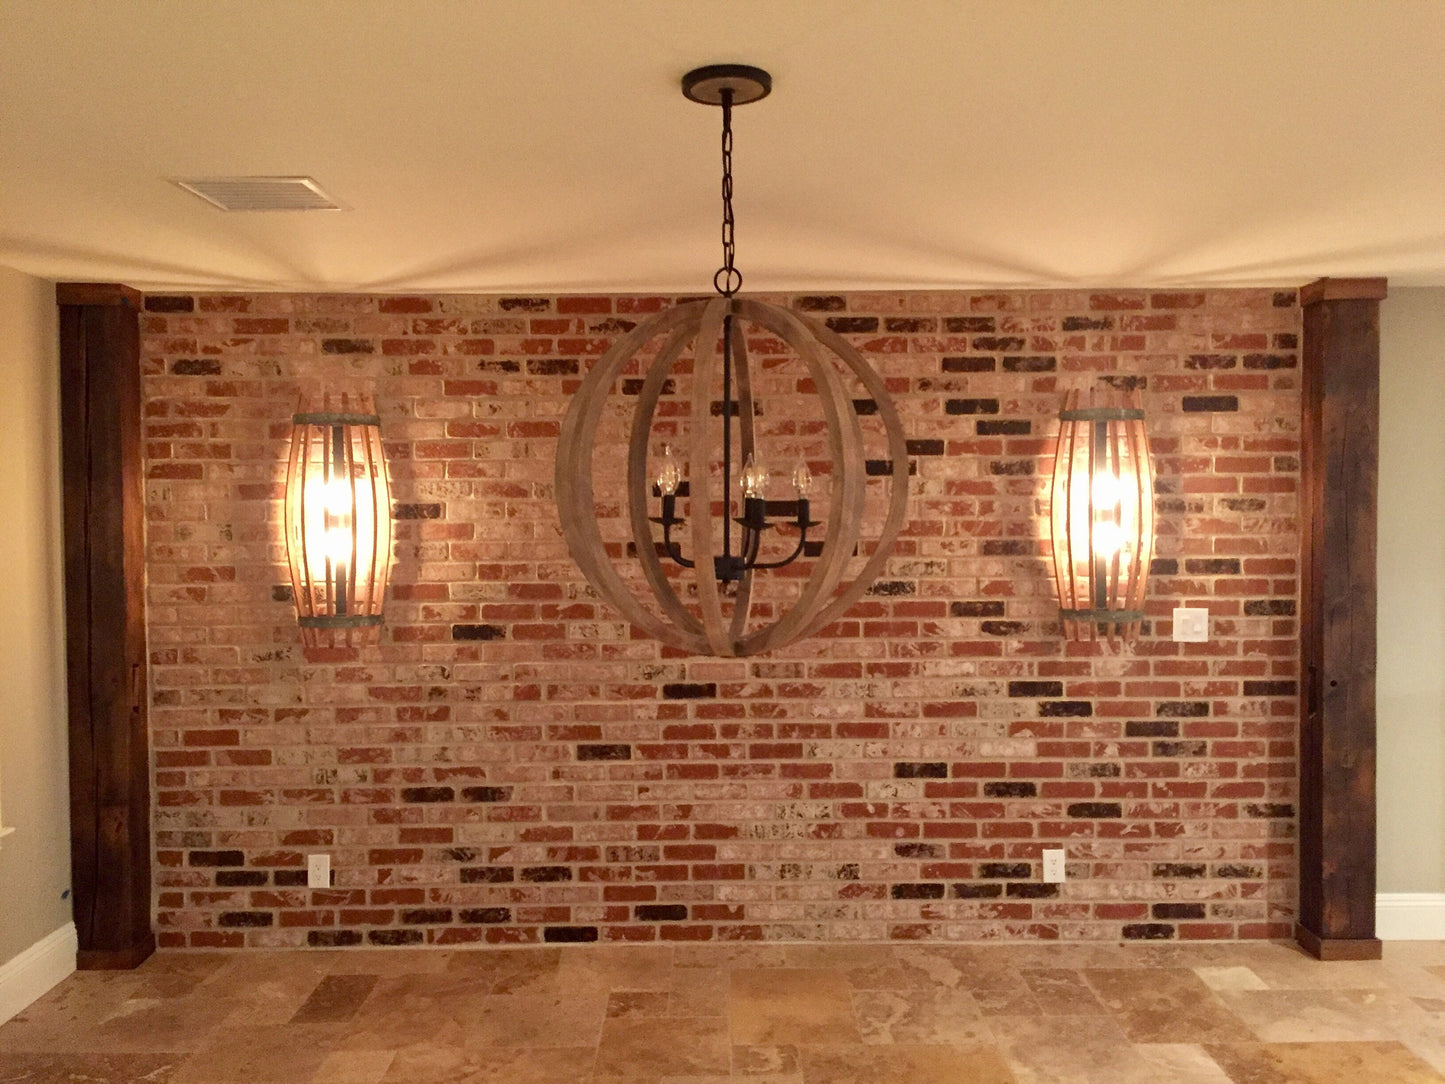 Wine Barrel Stave Wall Sconce - Half Catch - Made from retired California wine barrels and rings. 100% Recycled!